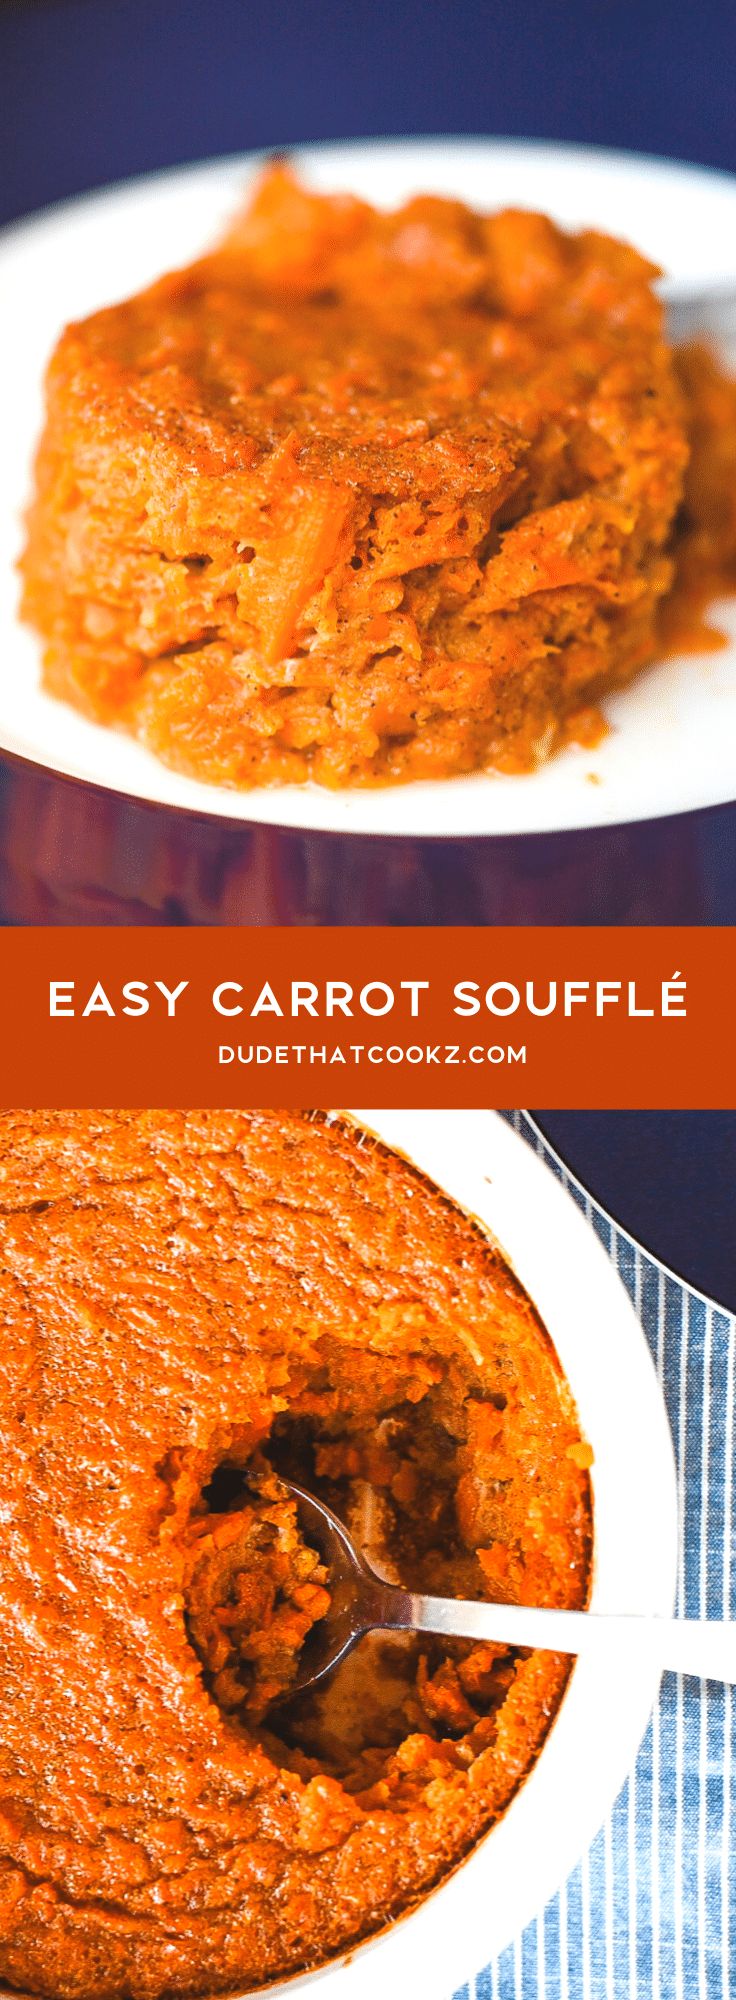 Carrot Souffle Recipe: Healthy, Delicious, and Perfect for Any Occasion